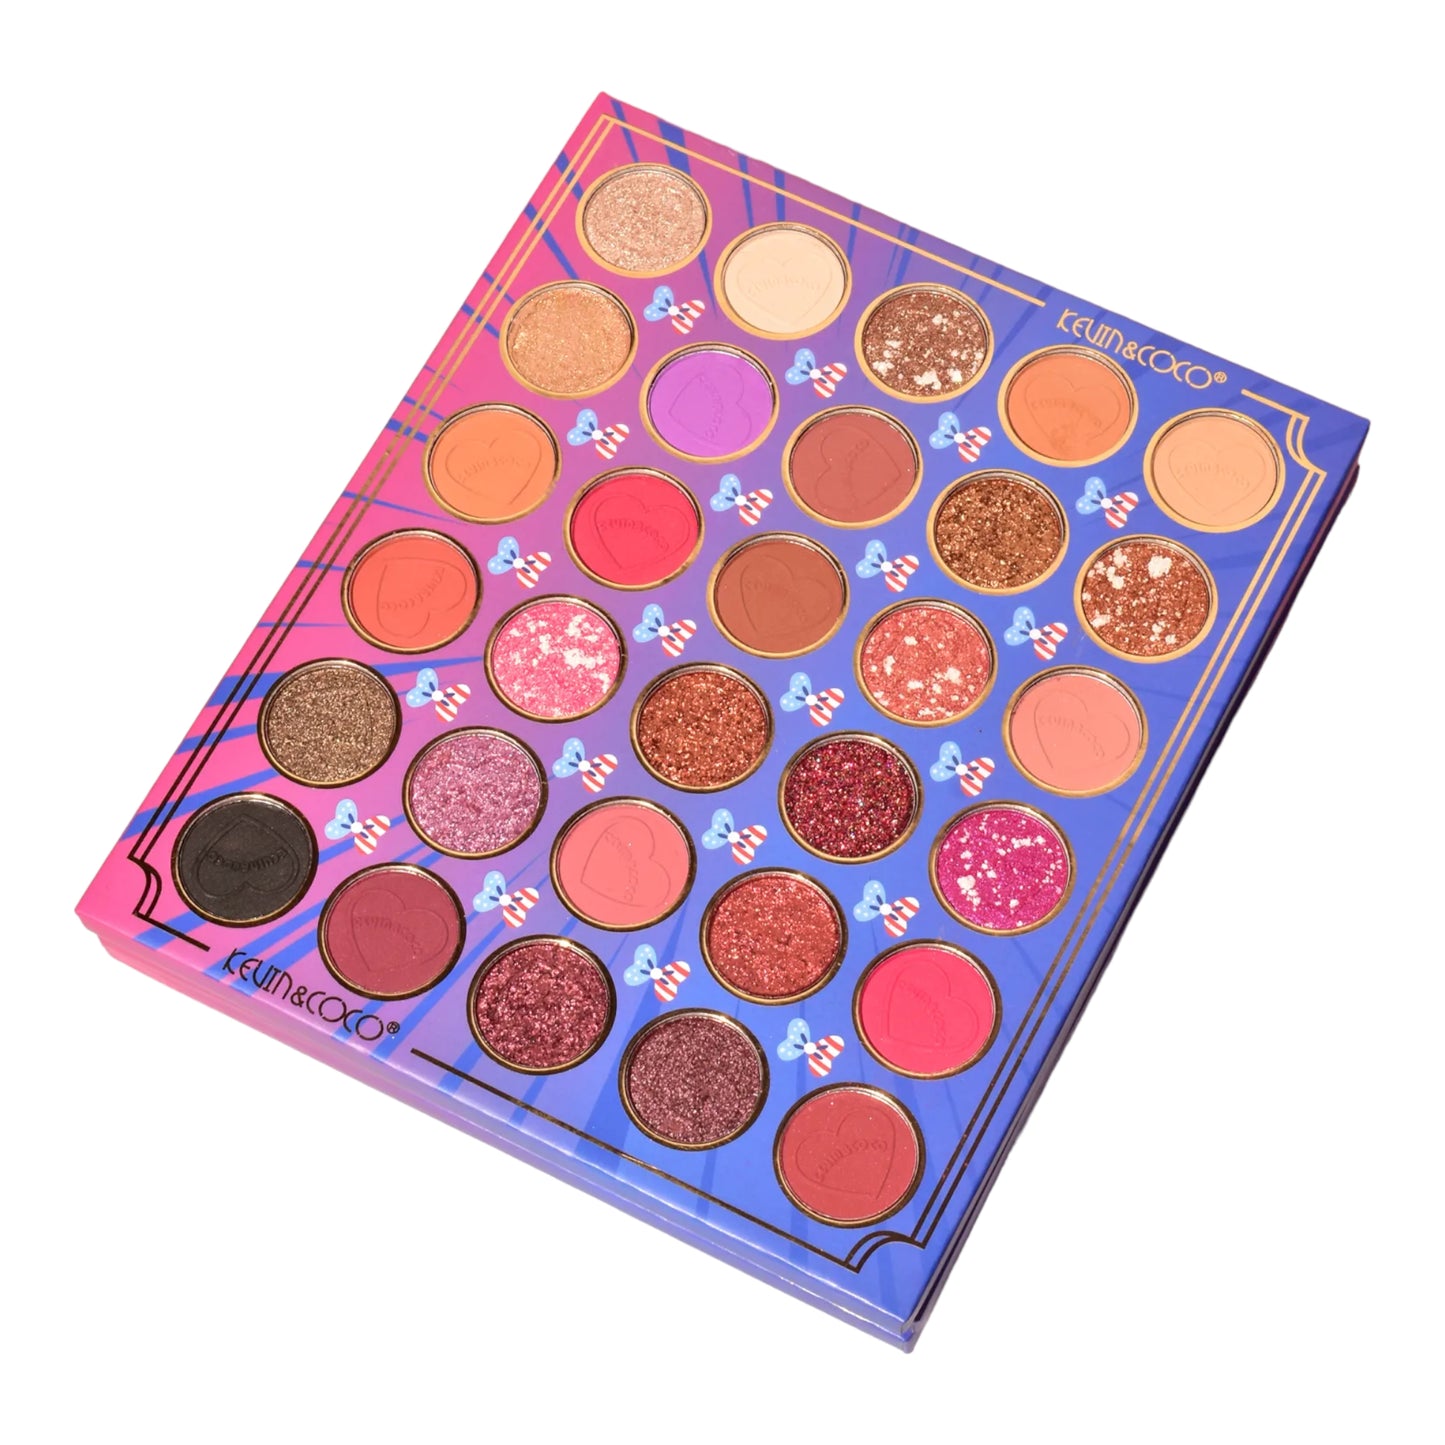 KEVIN&COCO INDEPENDENCE DAY 102 COLOR FASHION EYESHADOW PALETTE KC234400 R129